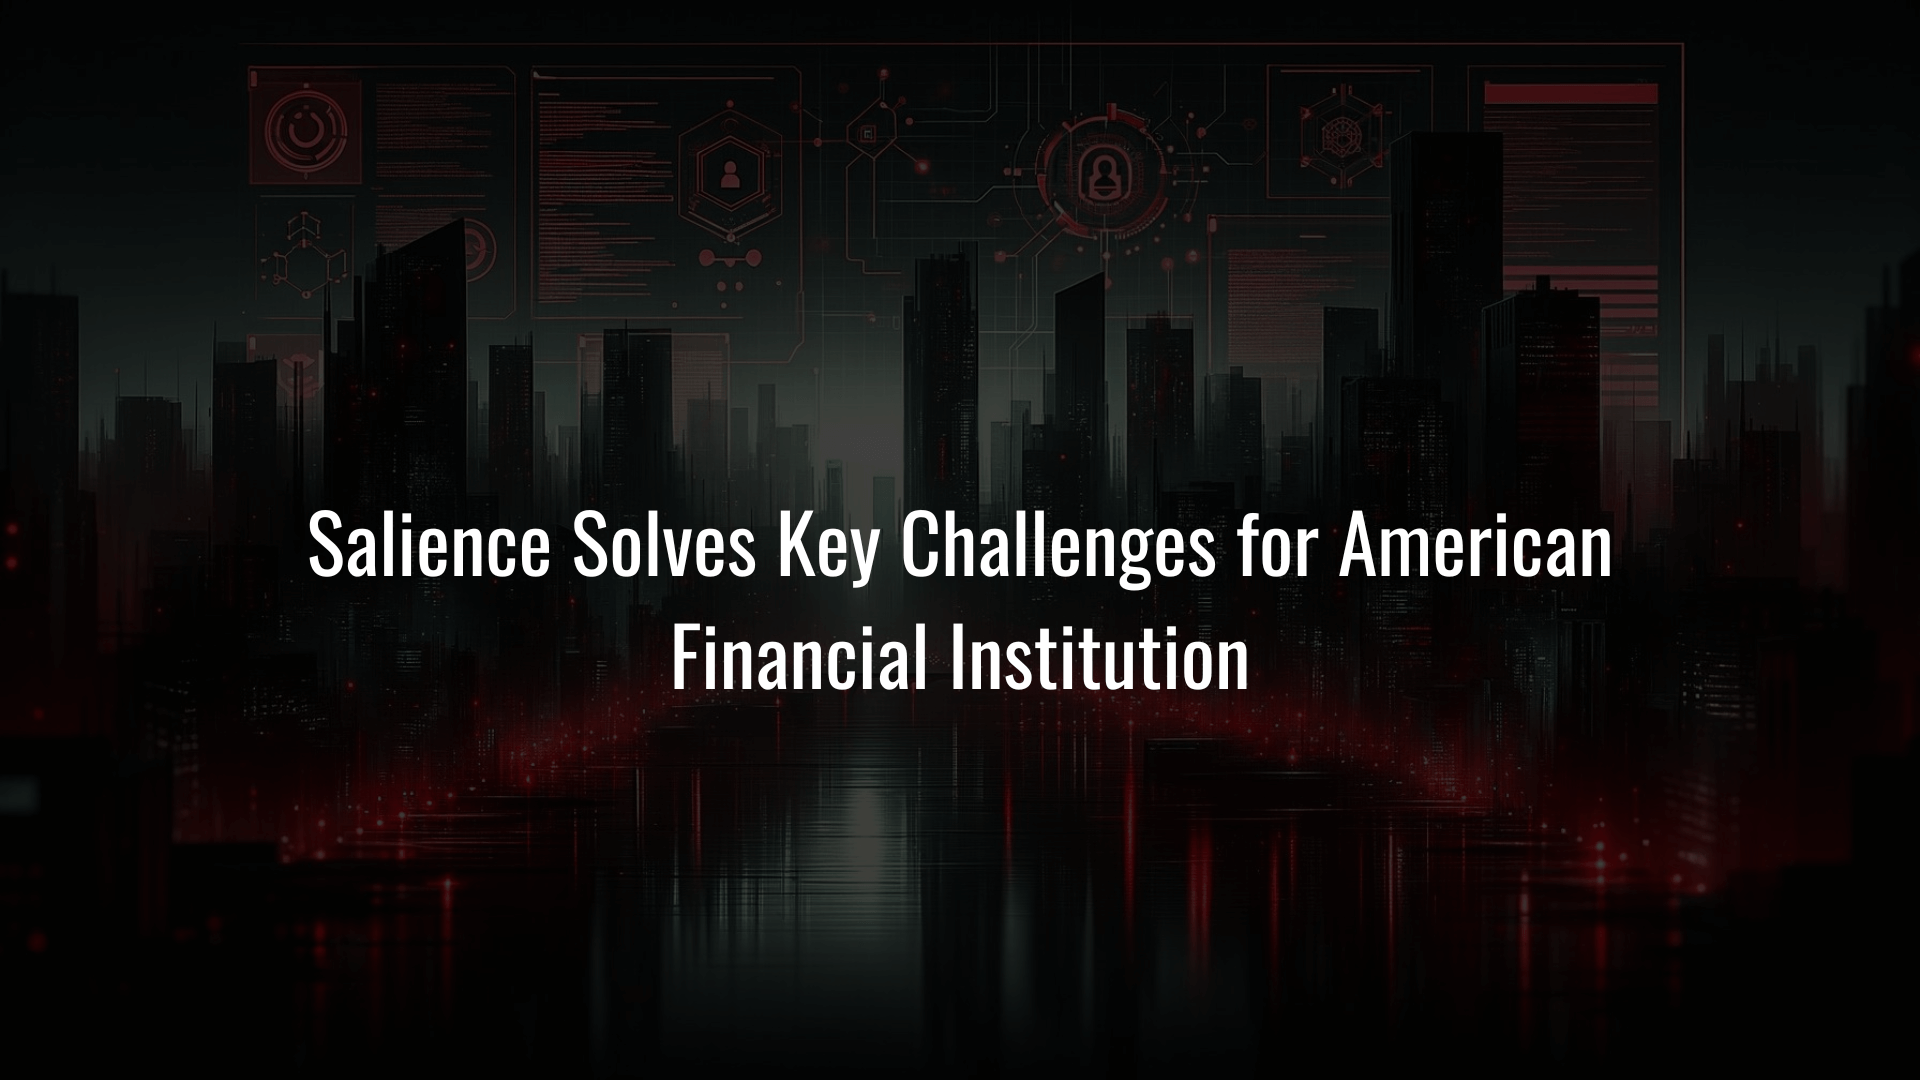 Salience Solves Key Challenges for American Financial Institution